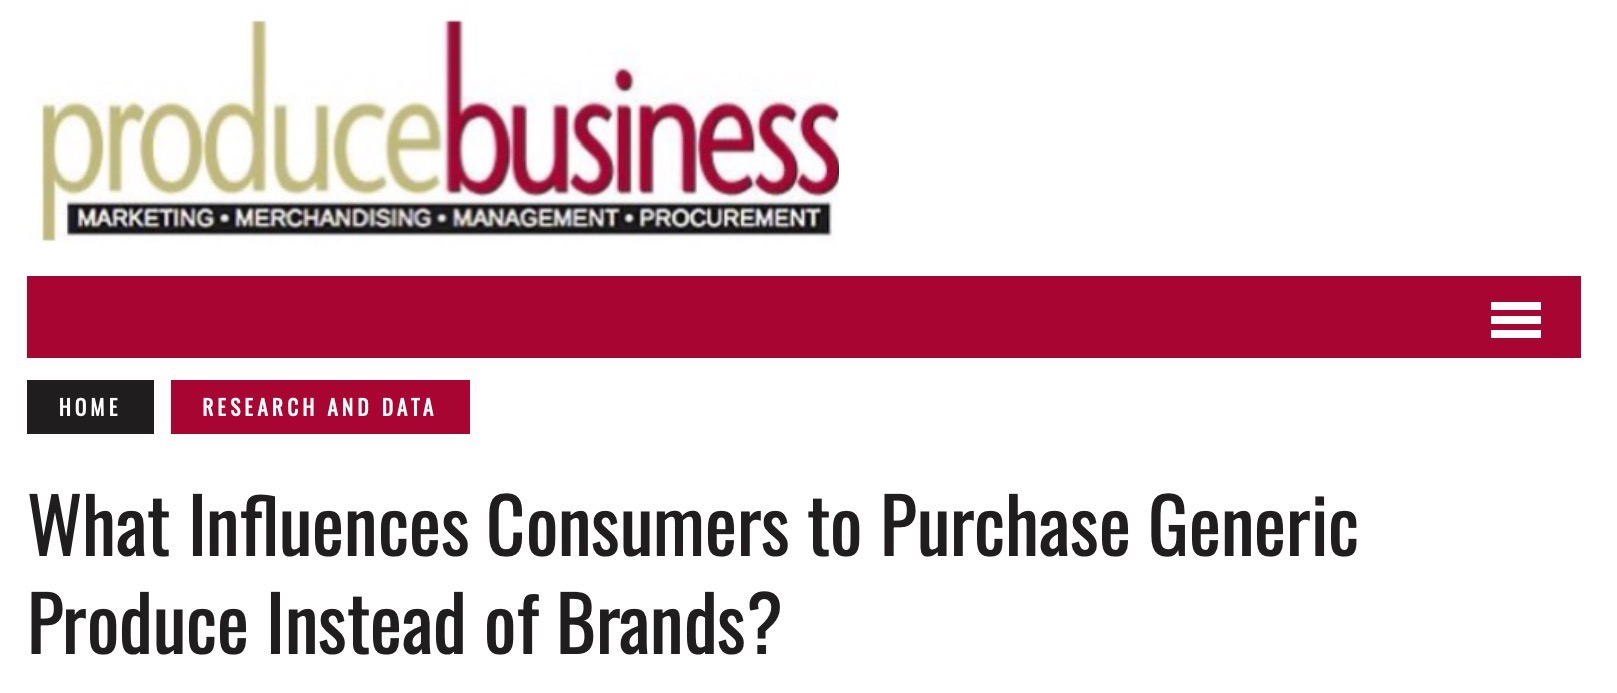 What Influences Consumers to Purchase Generic Produce Instead of Brands?